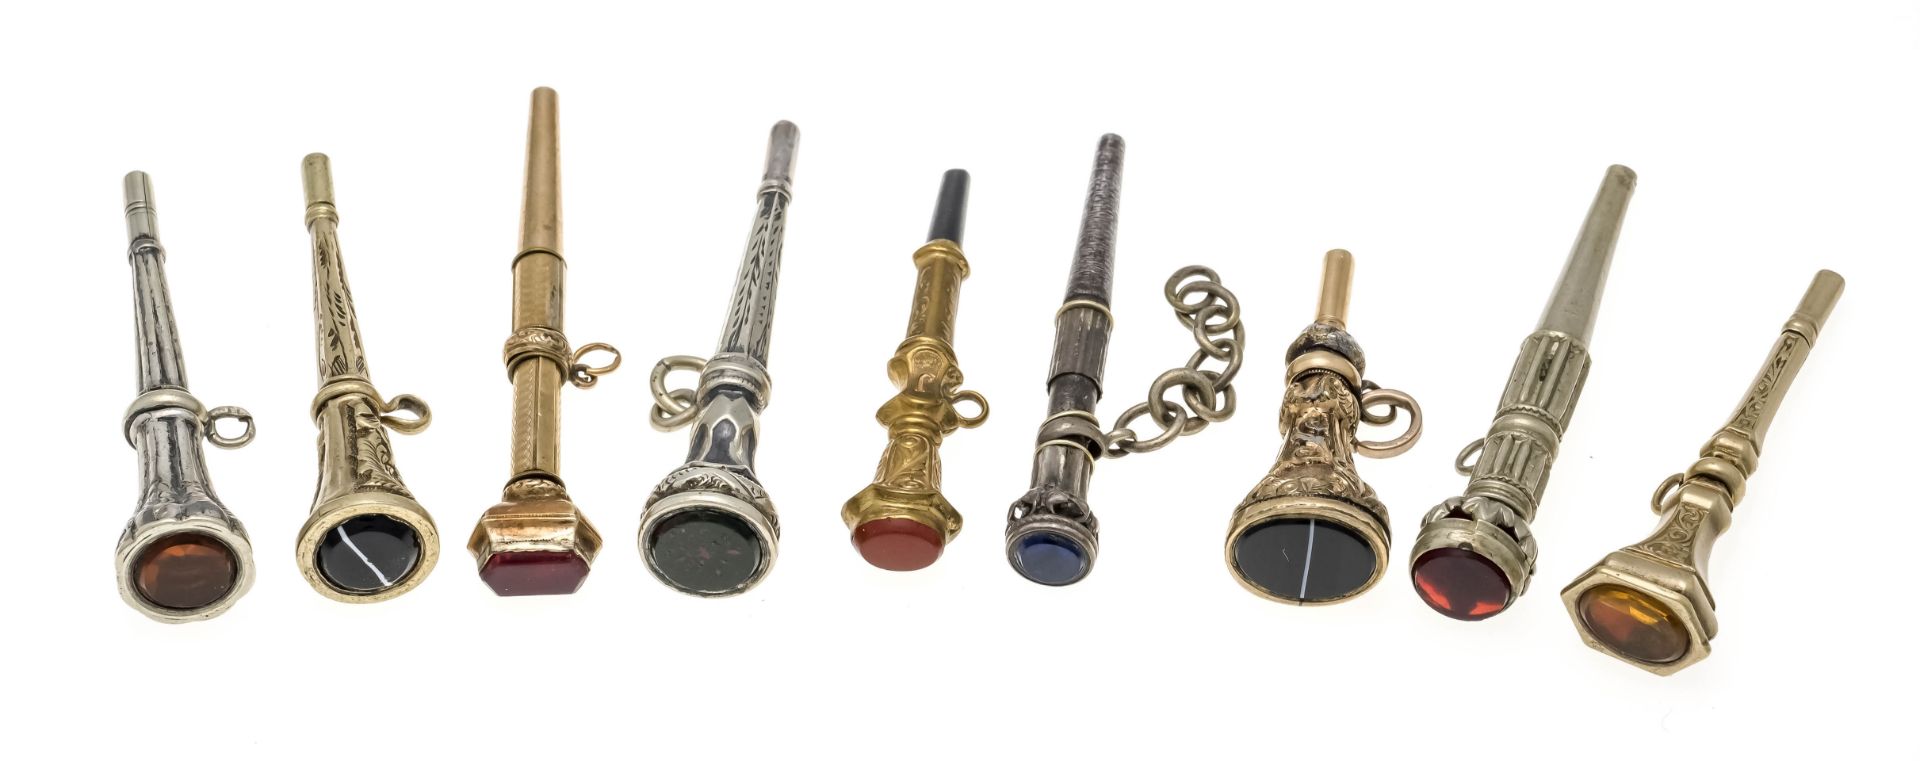 9 antique pocket watch keys, 19th century, in the head with various stones such as agate, onyx,